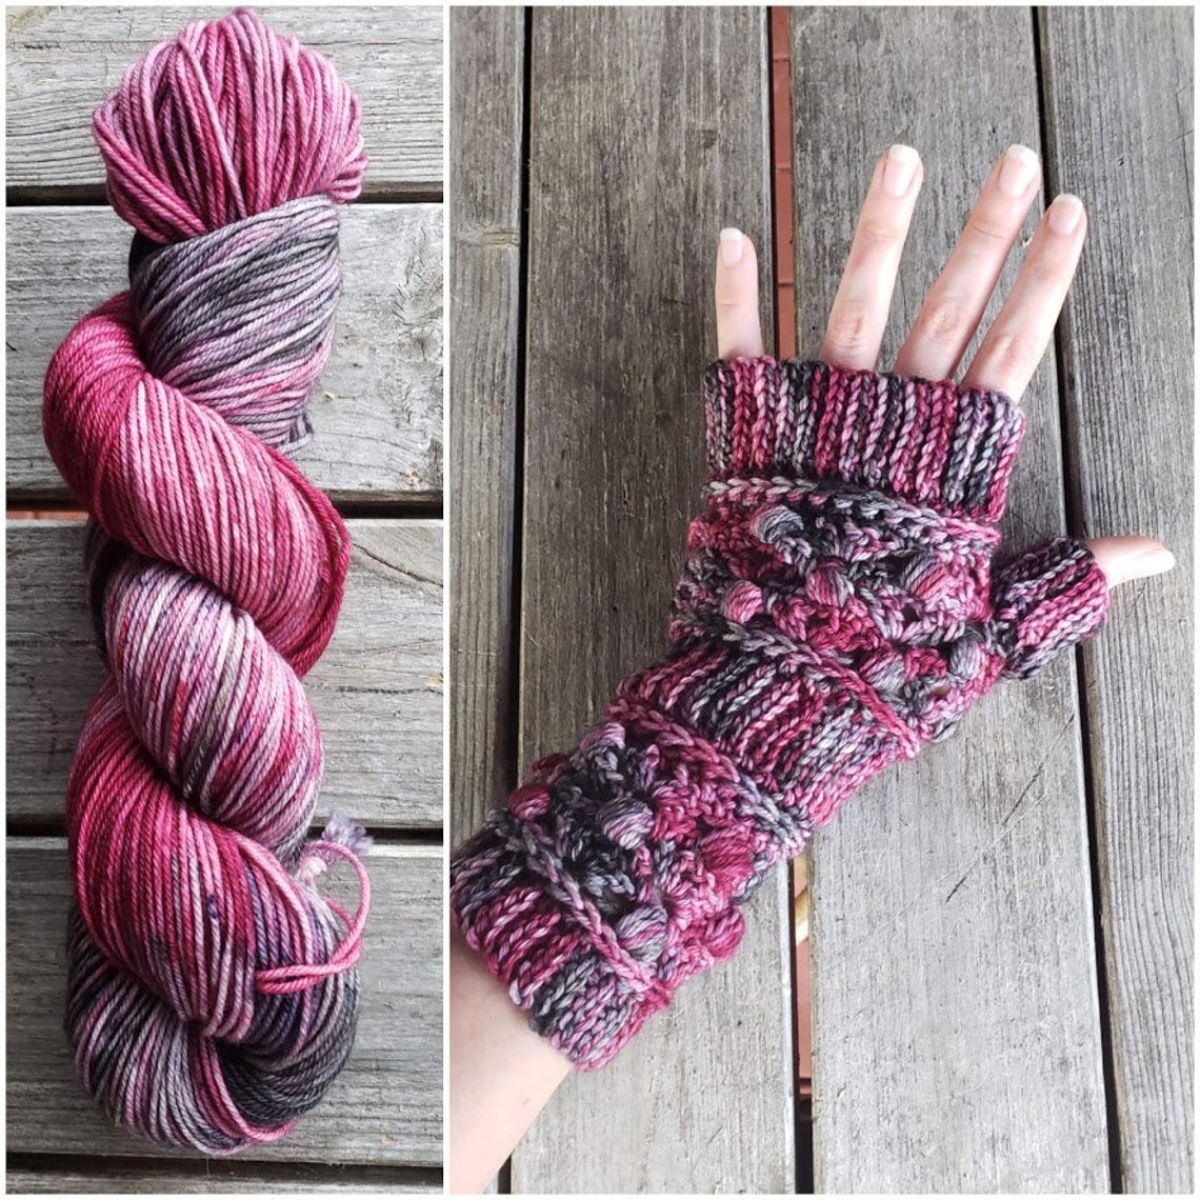 A twisted strip of pink and purple yarn next to a hand wearing a fingerless glove using the same color yarn with ribbed sections and a diamond shape pattern. 